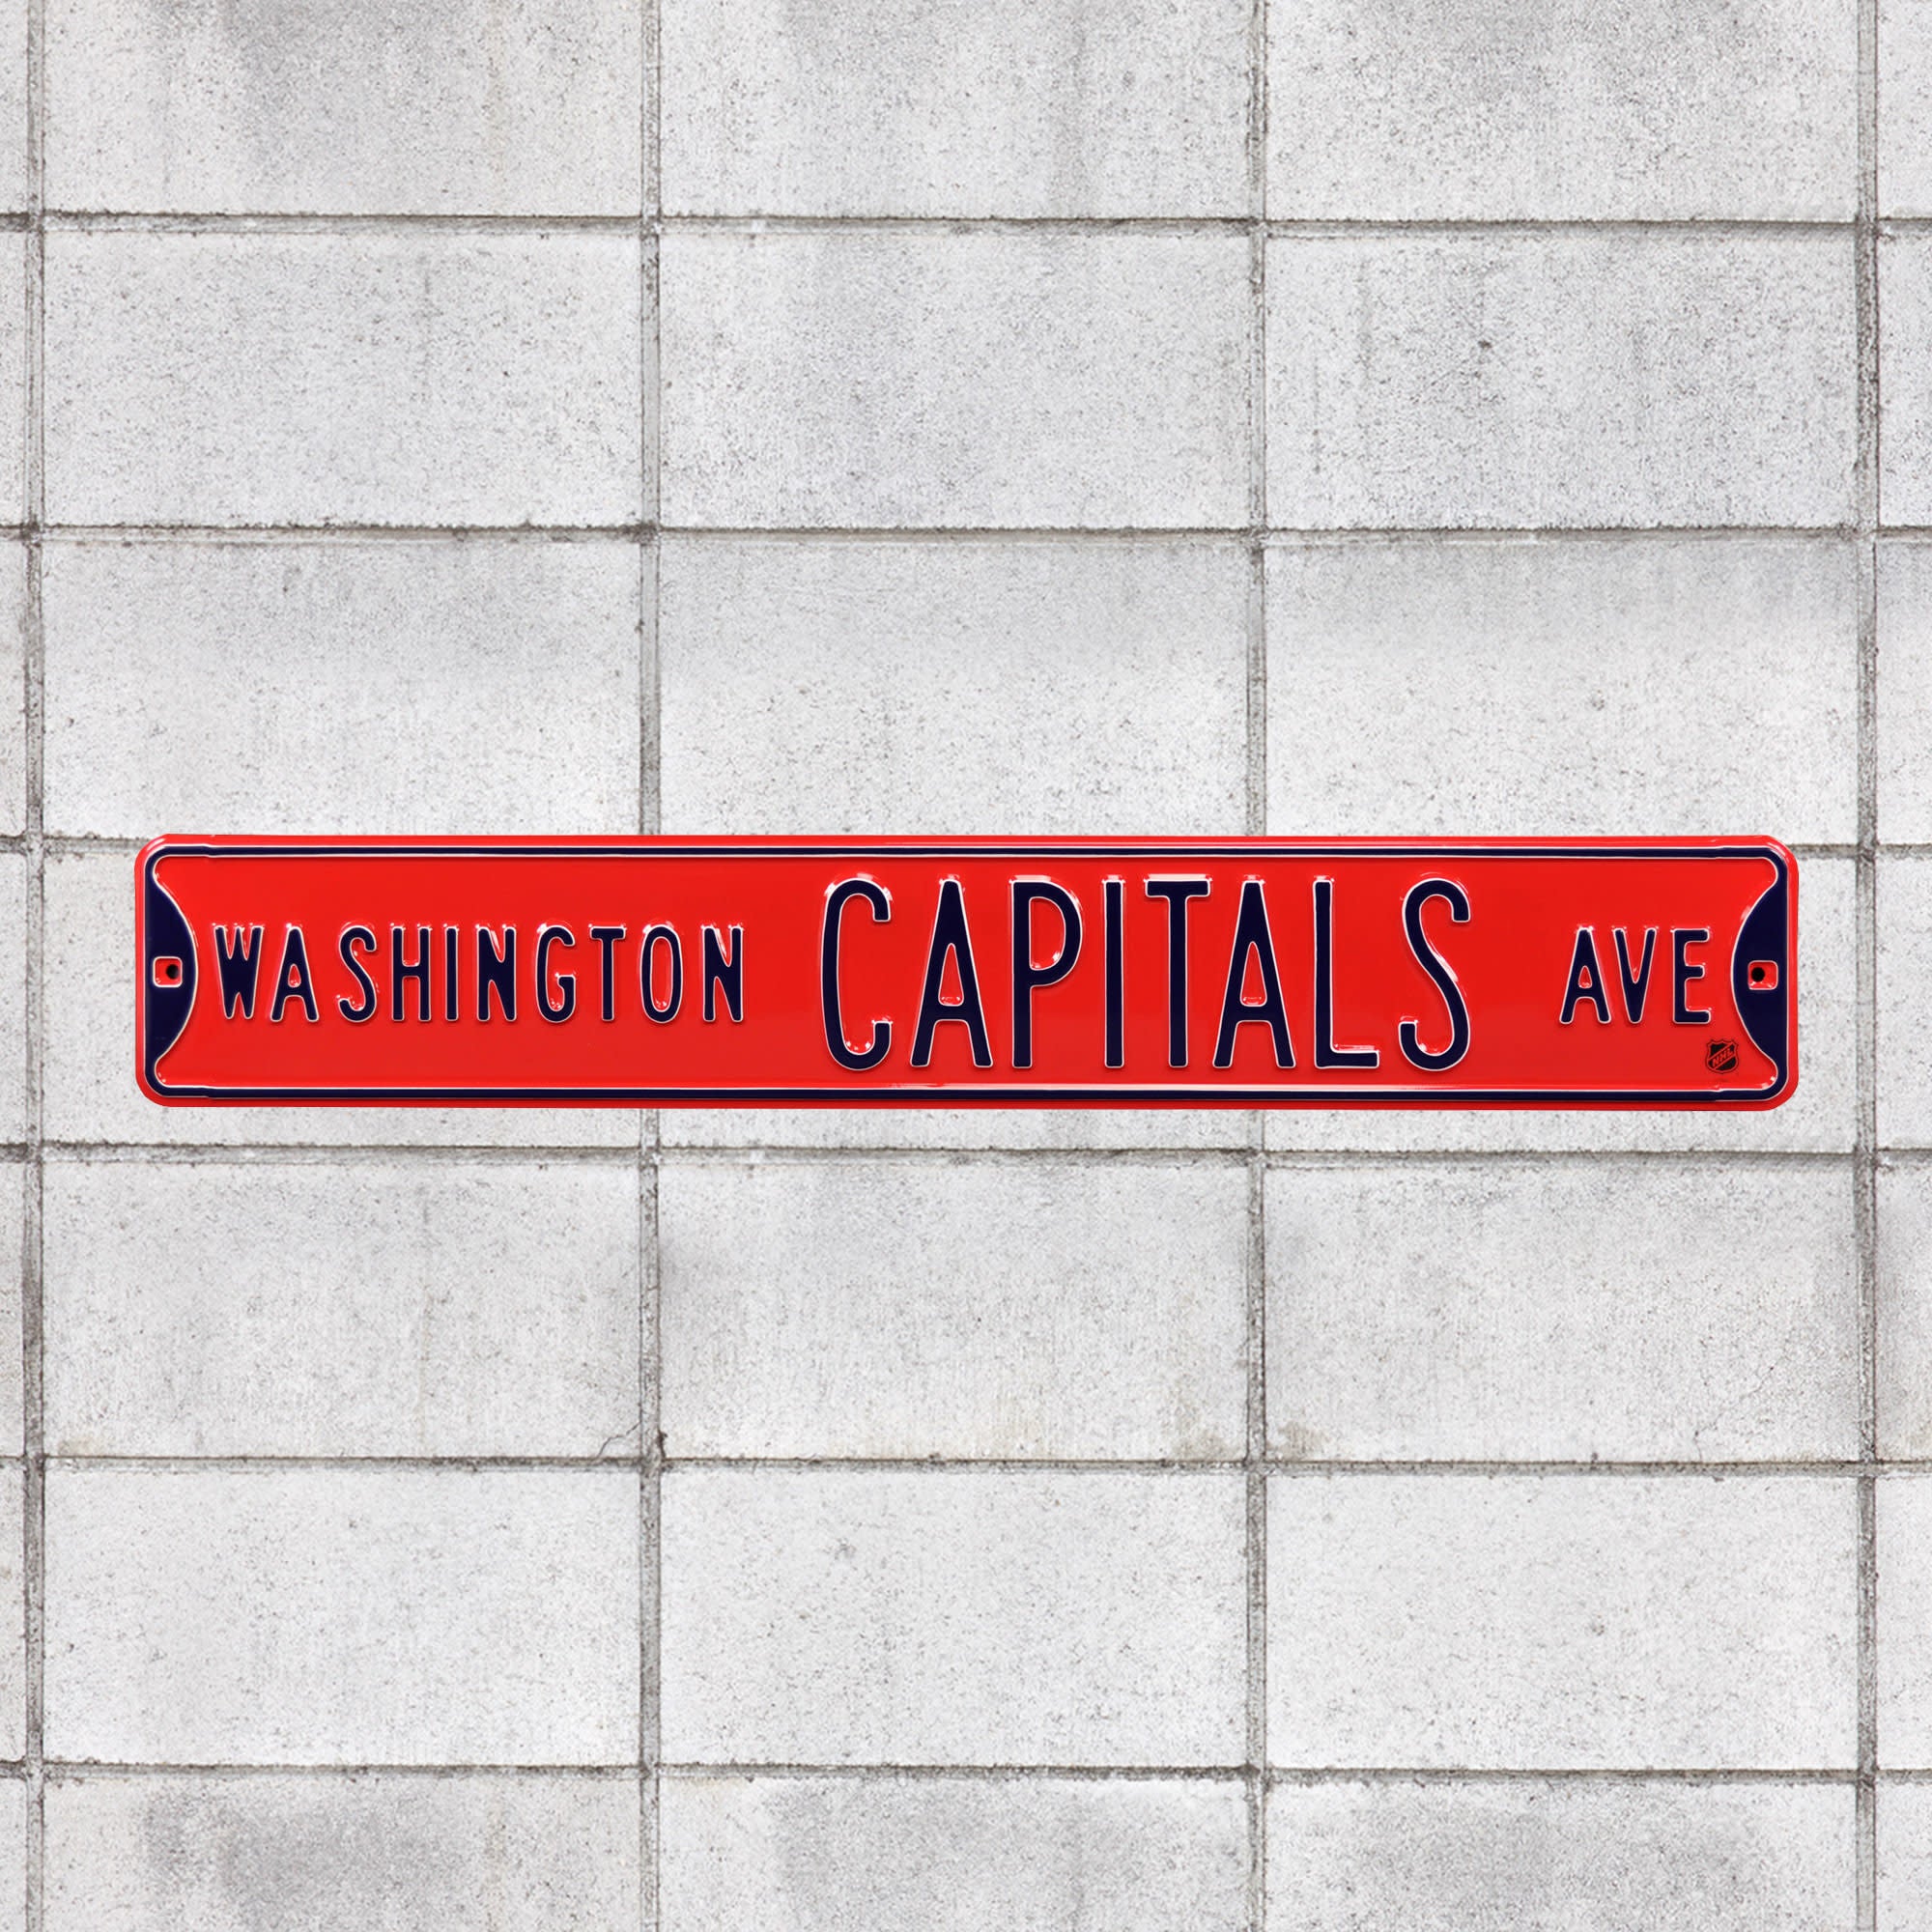 Washington Capitals: Washington Capitals Avenue - Officially Licensed NHL Metal Street Sign 36.0"W x 6.0"H by Fathead | 100% Ste